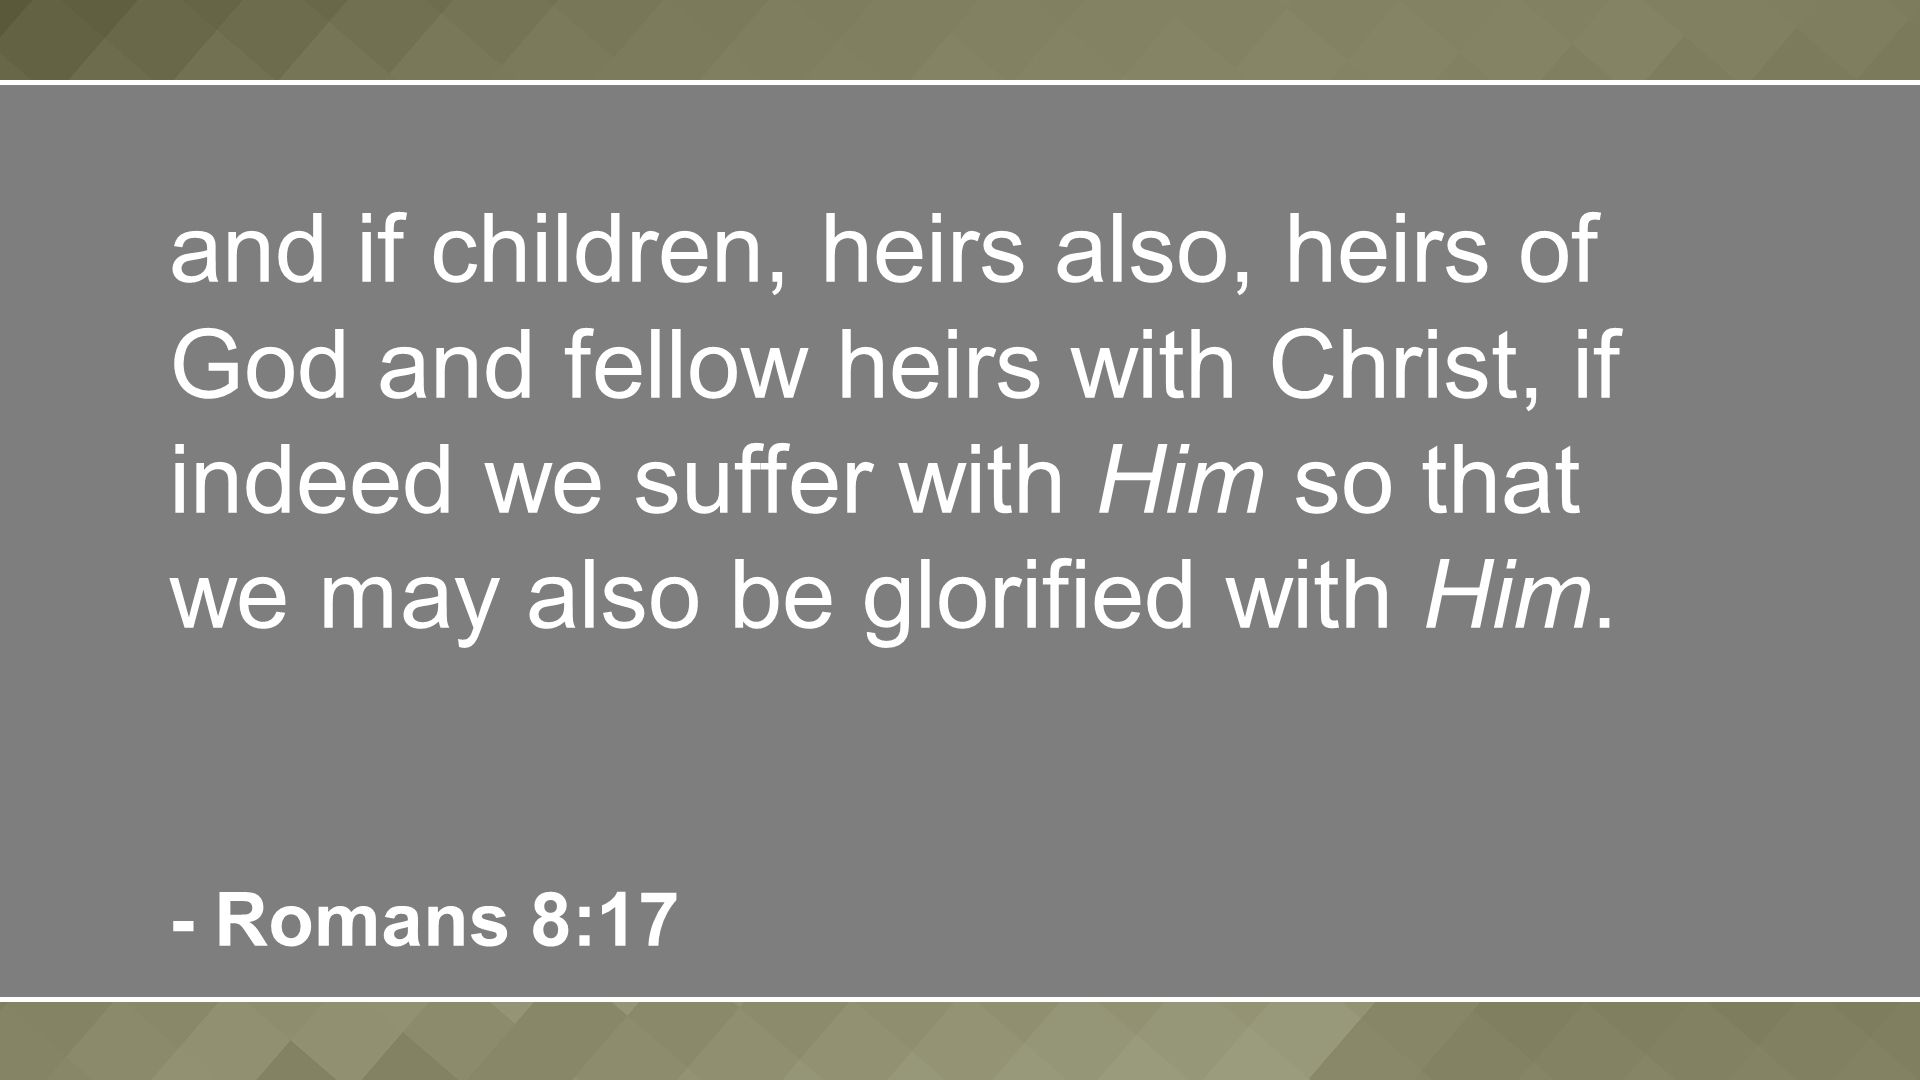 and if children, heirs also, heirs of God and fellow heirs with Christ, if indeed we suffer with Him so that we may also be glorified with Him.